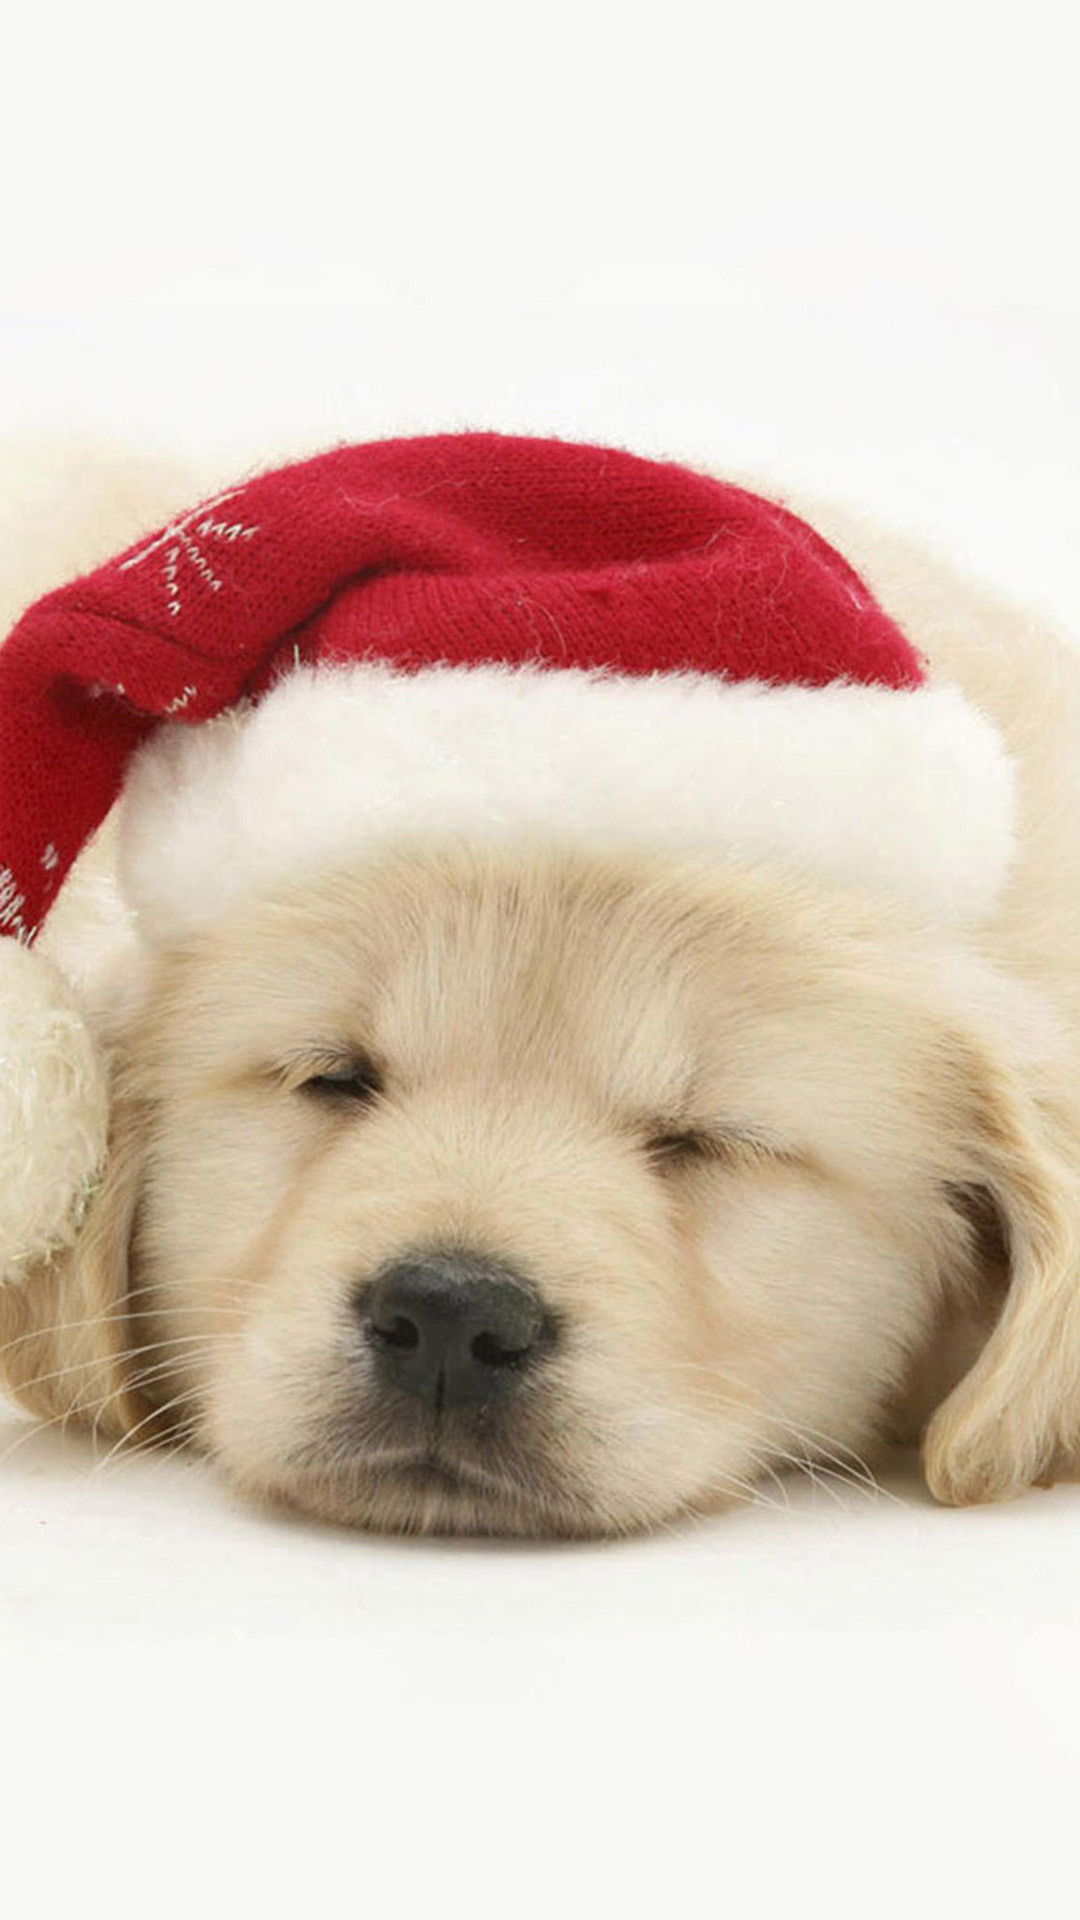 1080x1920 Cute Puppy In Christmas Hat iphone images.